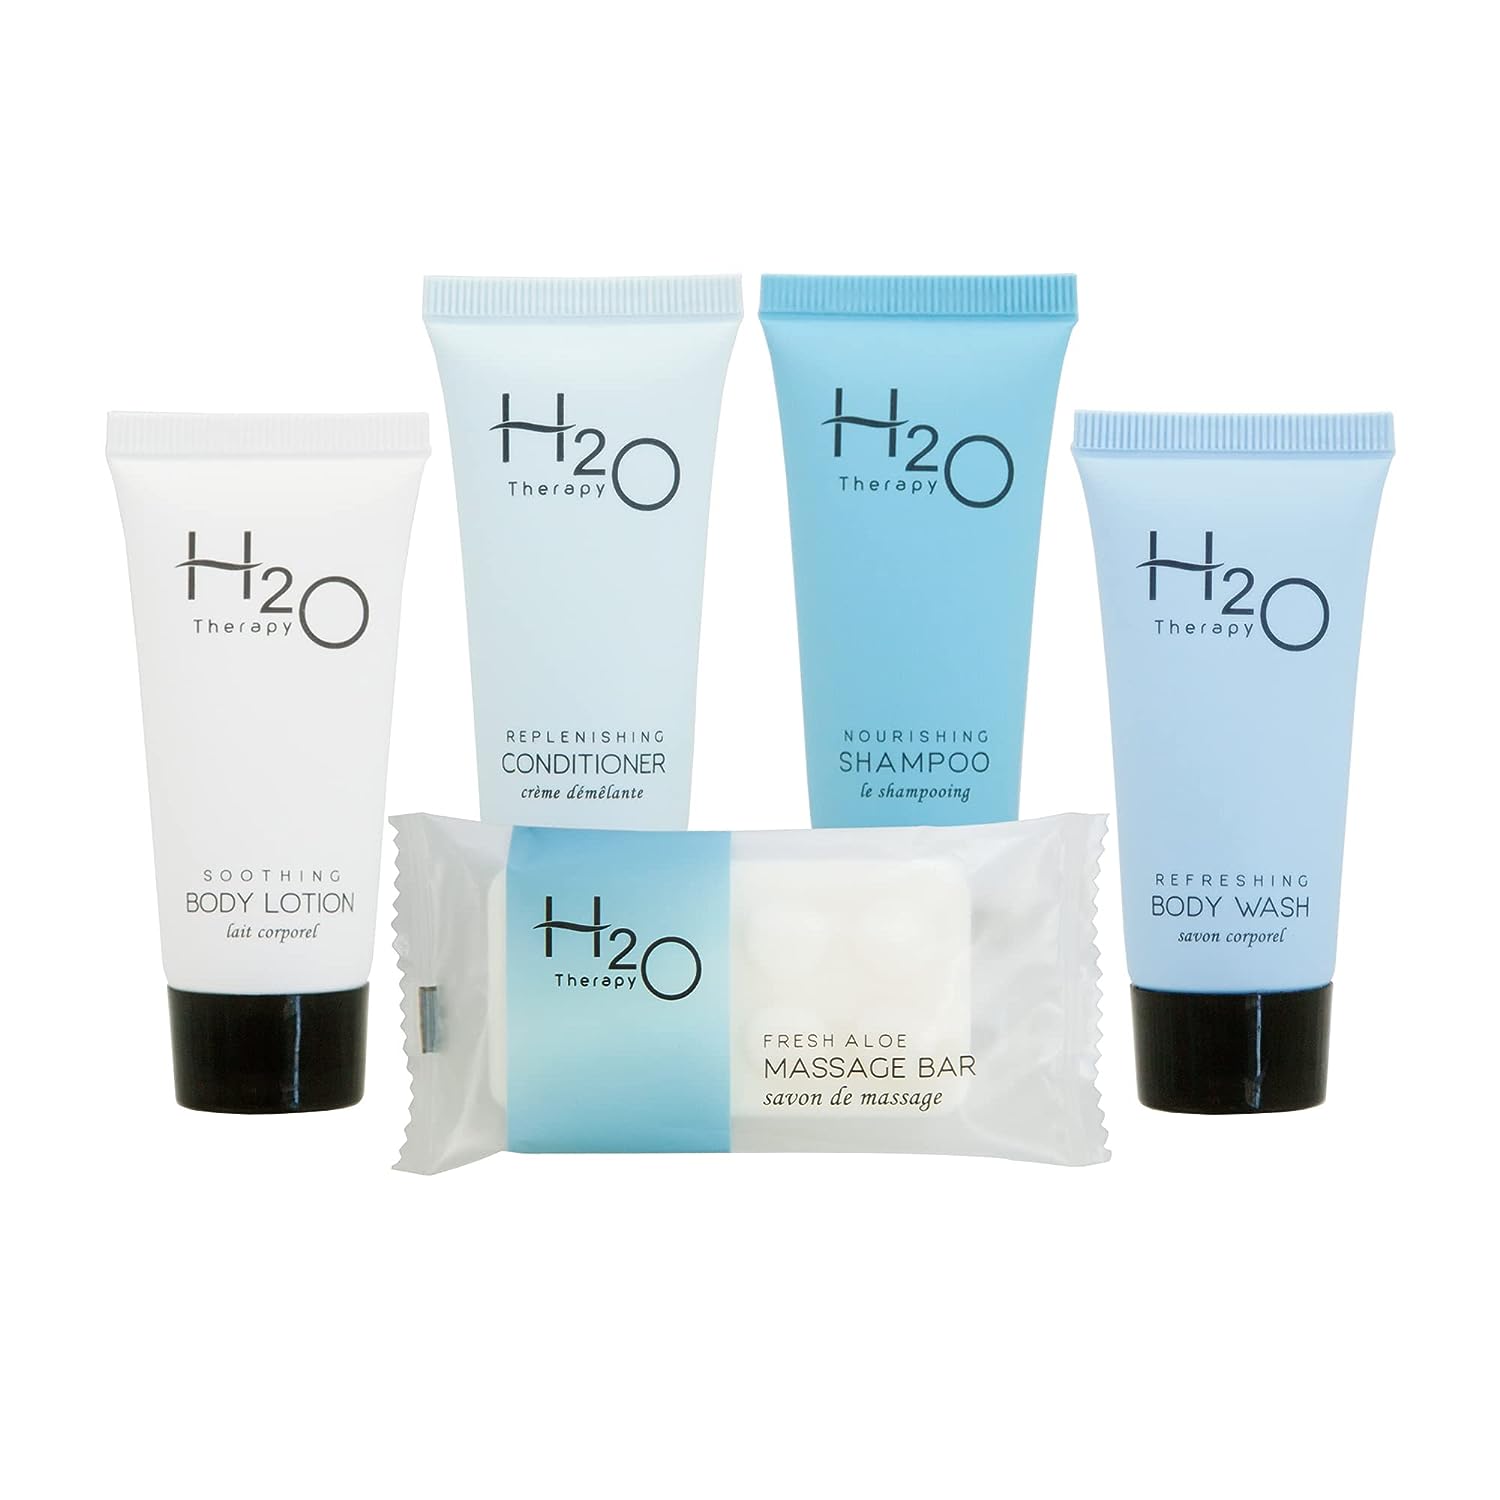 H2O Therapy Hotel Soaps and Toiletries Bulk Set | 1-Shoppe All-In-Kit Amenities for Hotels & Airbnb | .85 Hotel Shampoo & Conditioner, Body Wash, Body Lotion & 1  Bar Soap Travel Size | 300 Pieces